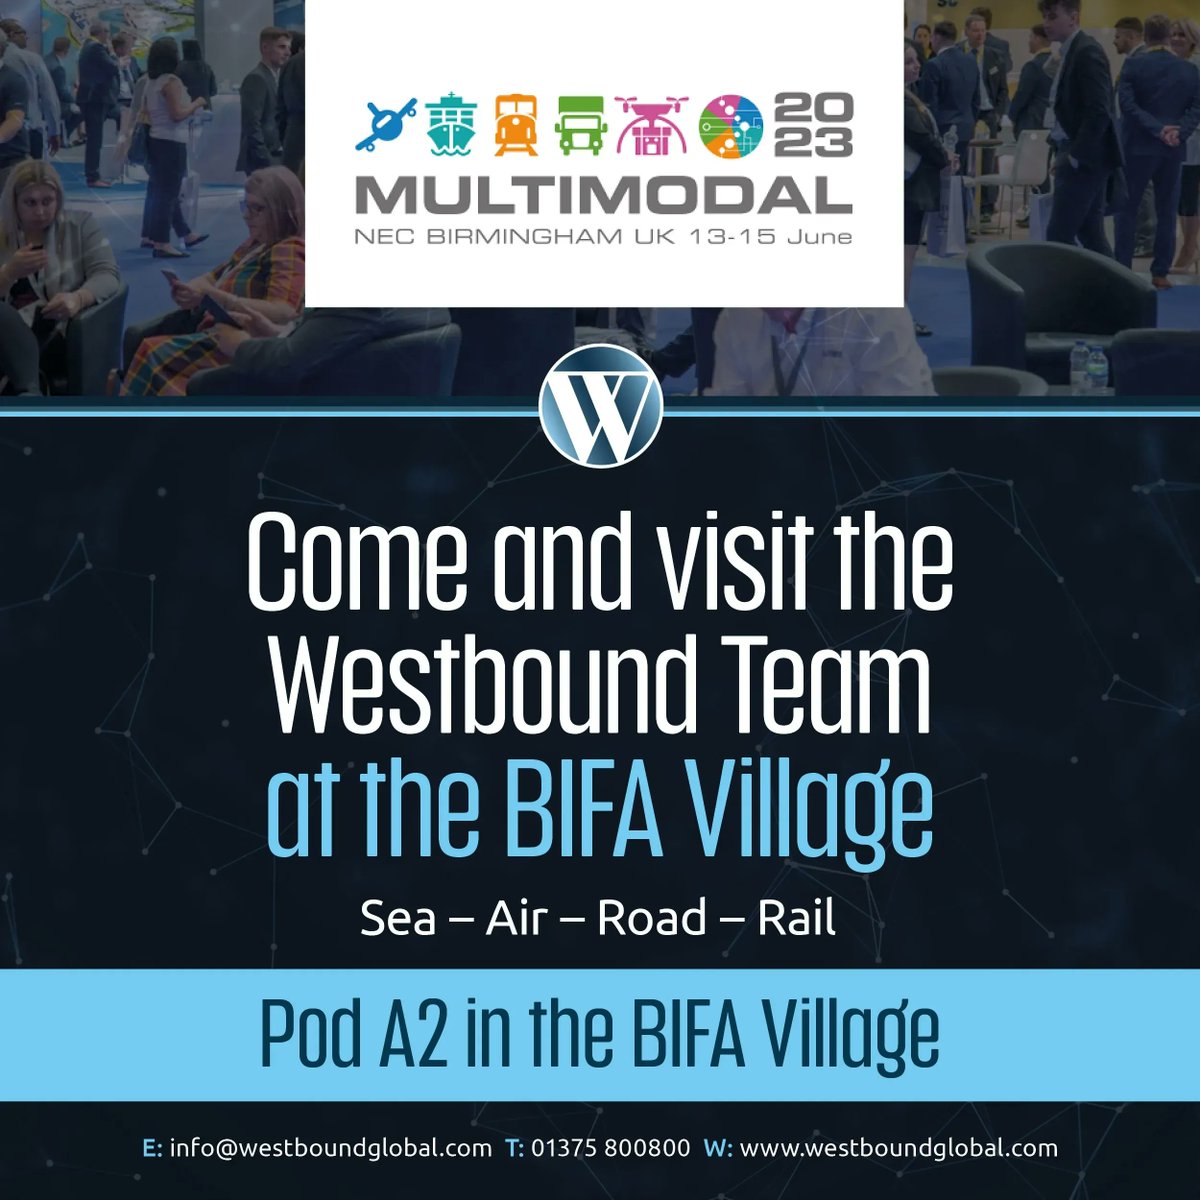 Come and visit Westbound Logistics at Pod A2 in the BIFA Village at Multimodal 2023
13th - 15th June at the NEC Birmingham

#multimodal #multimodal2023 #bifavillage #roadfreight #seafreight #airfreight #logistics #supplychain #globaltrade #importing #exporting #freightforwarder